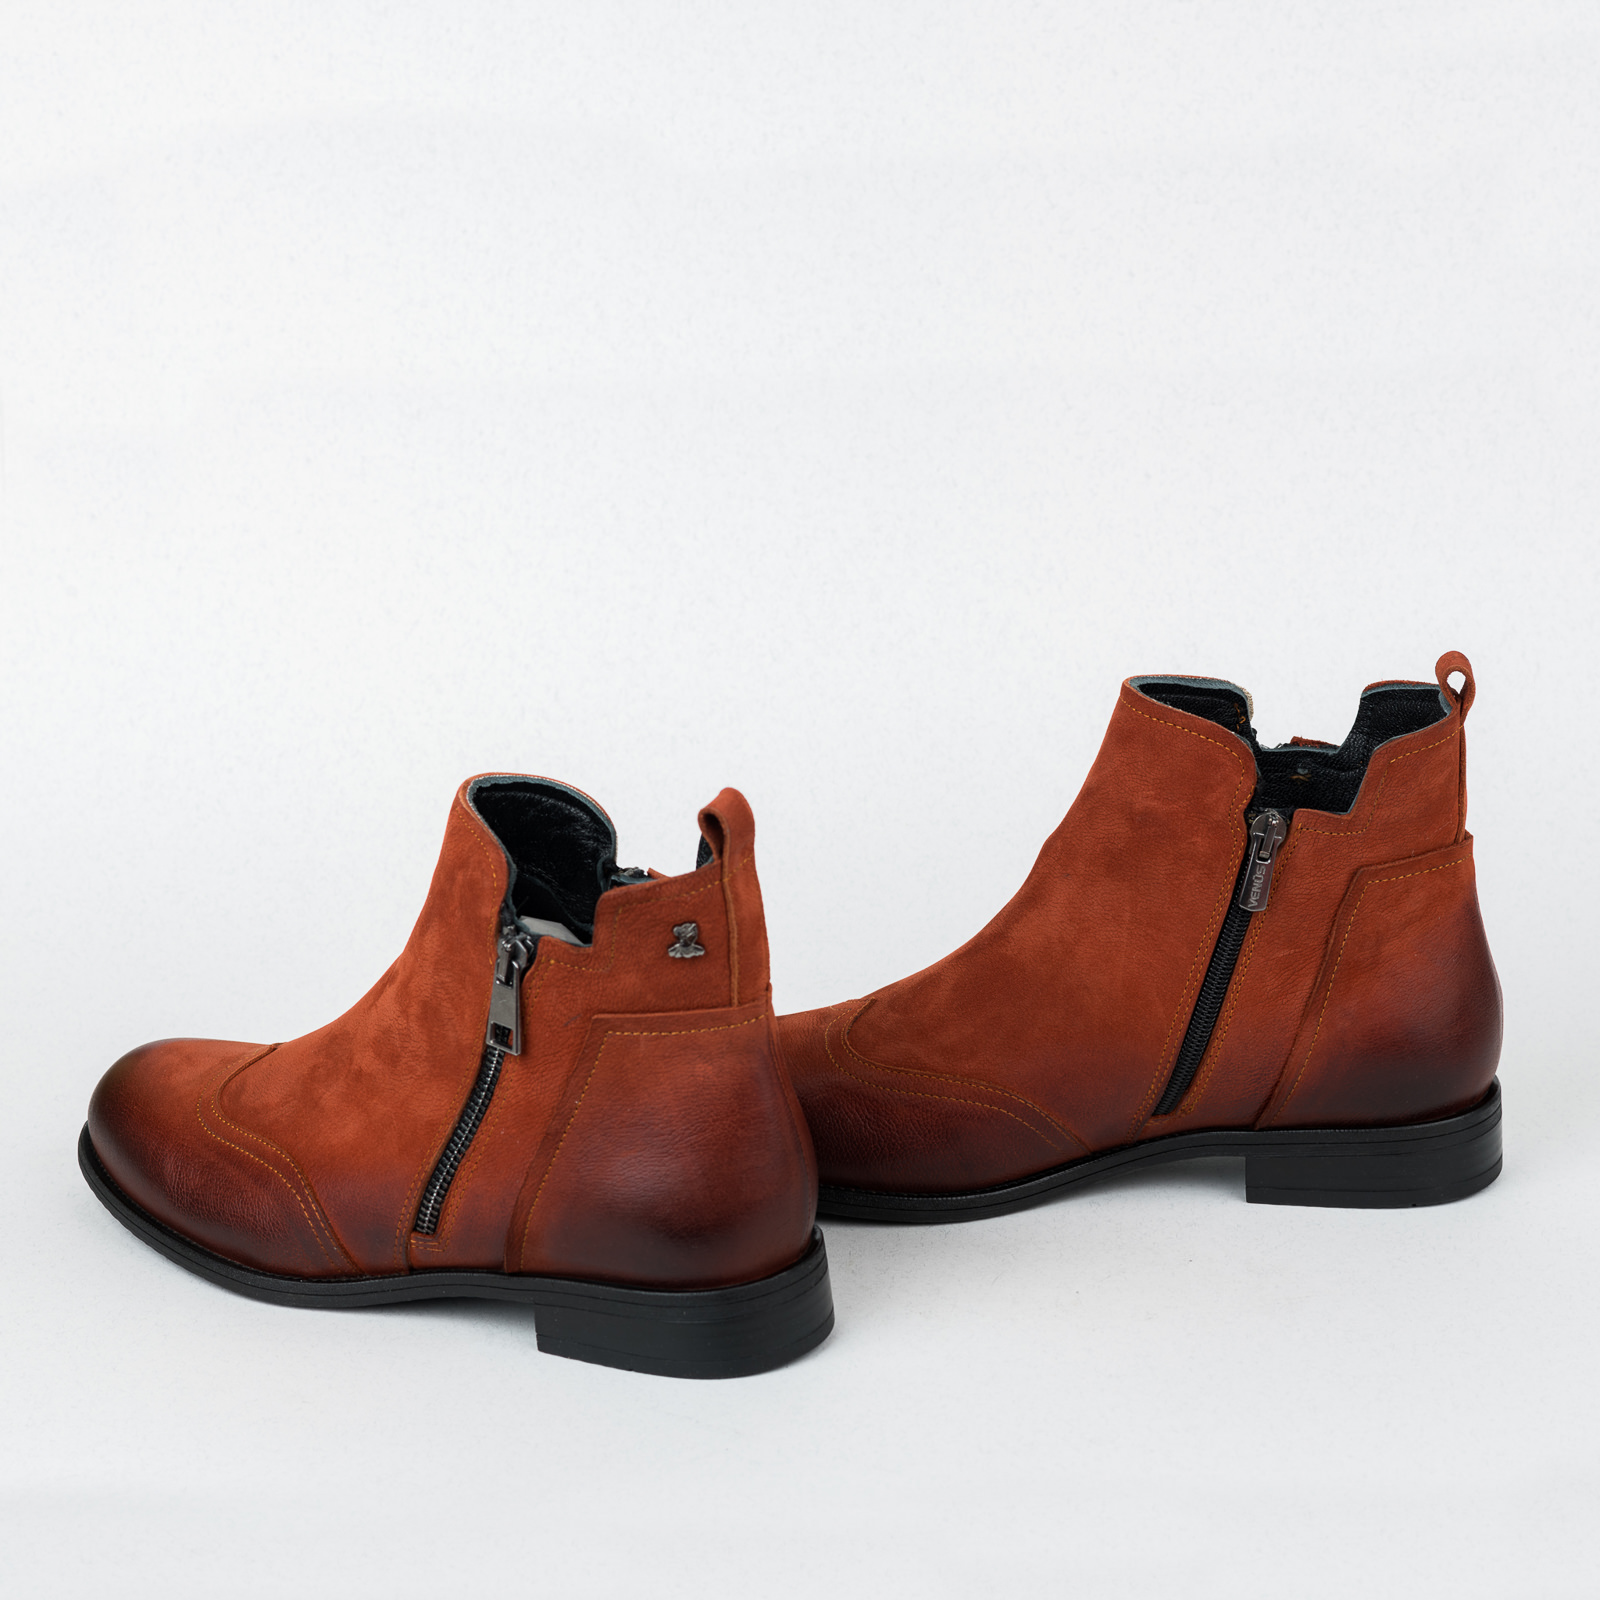 Leather ankle boots B442 - ORANGE